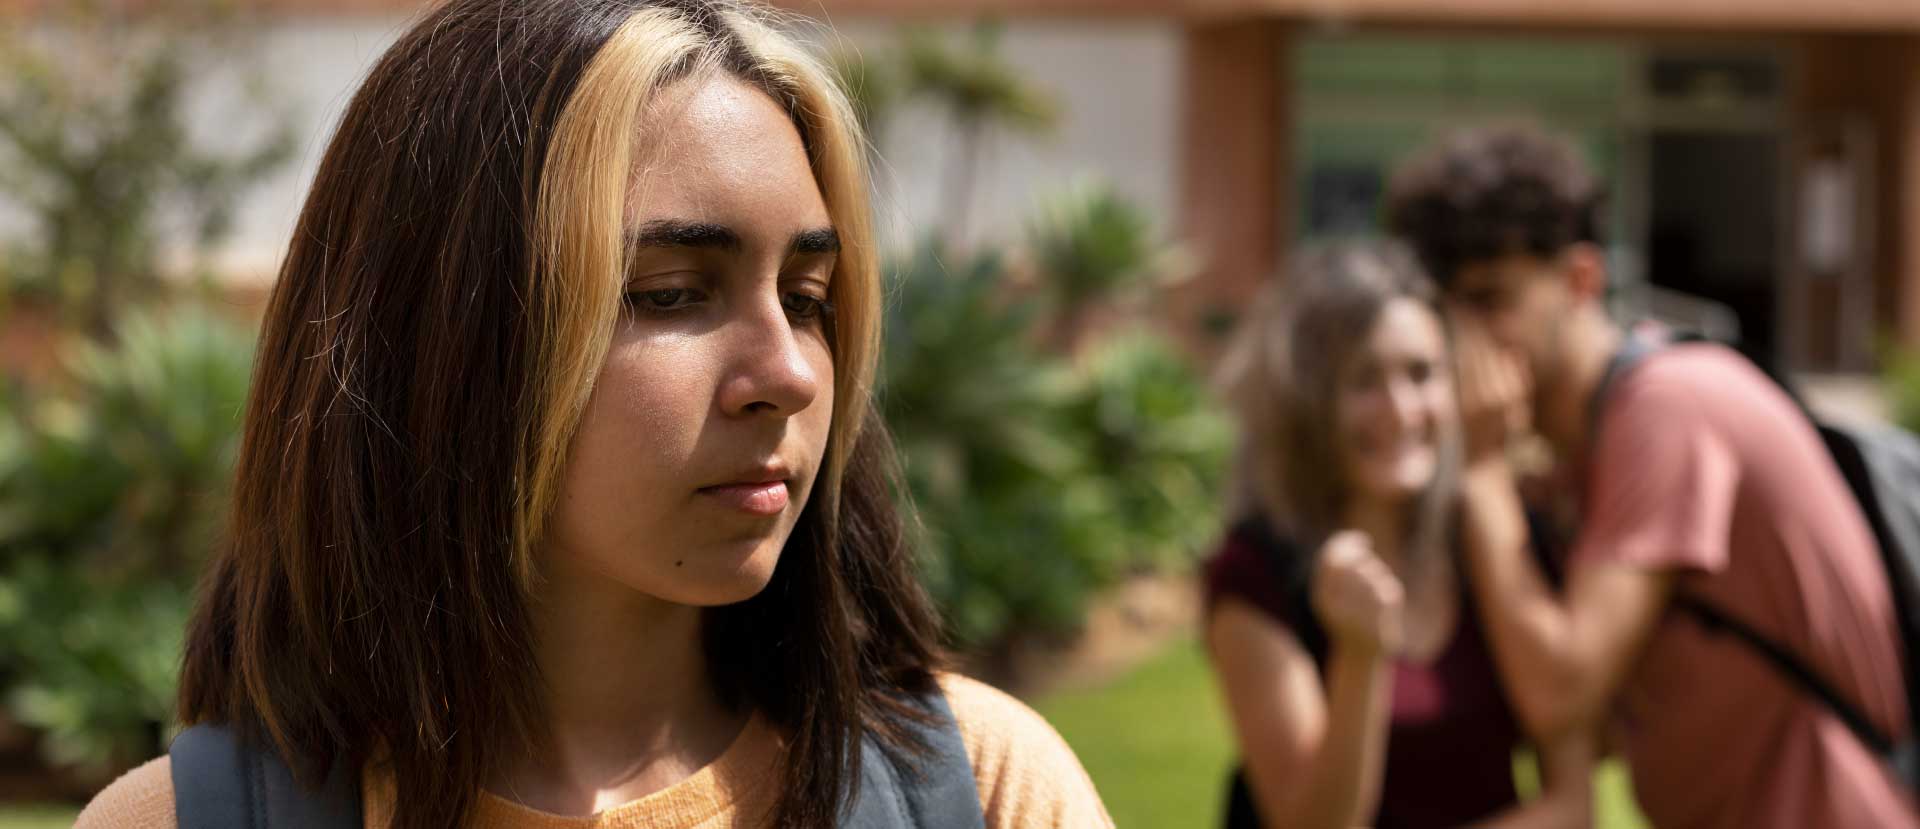 teen bullying mental therapy